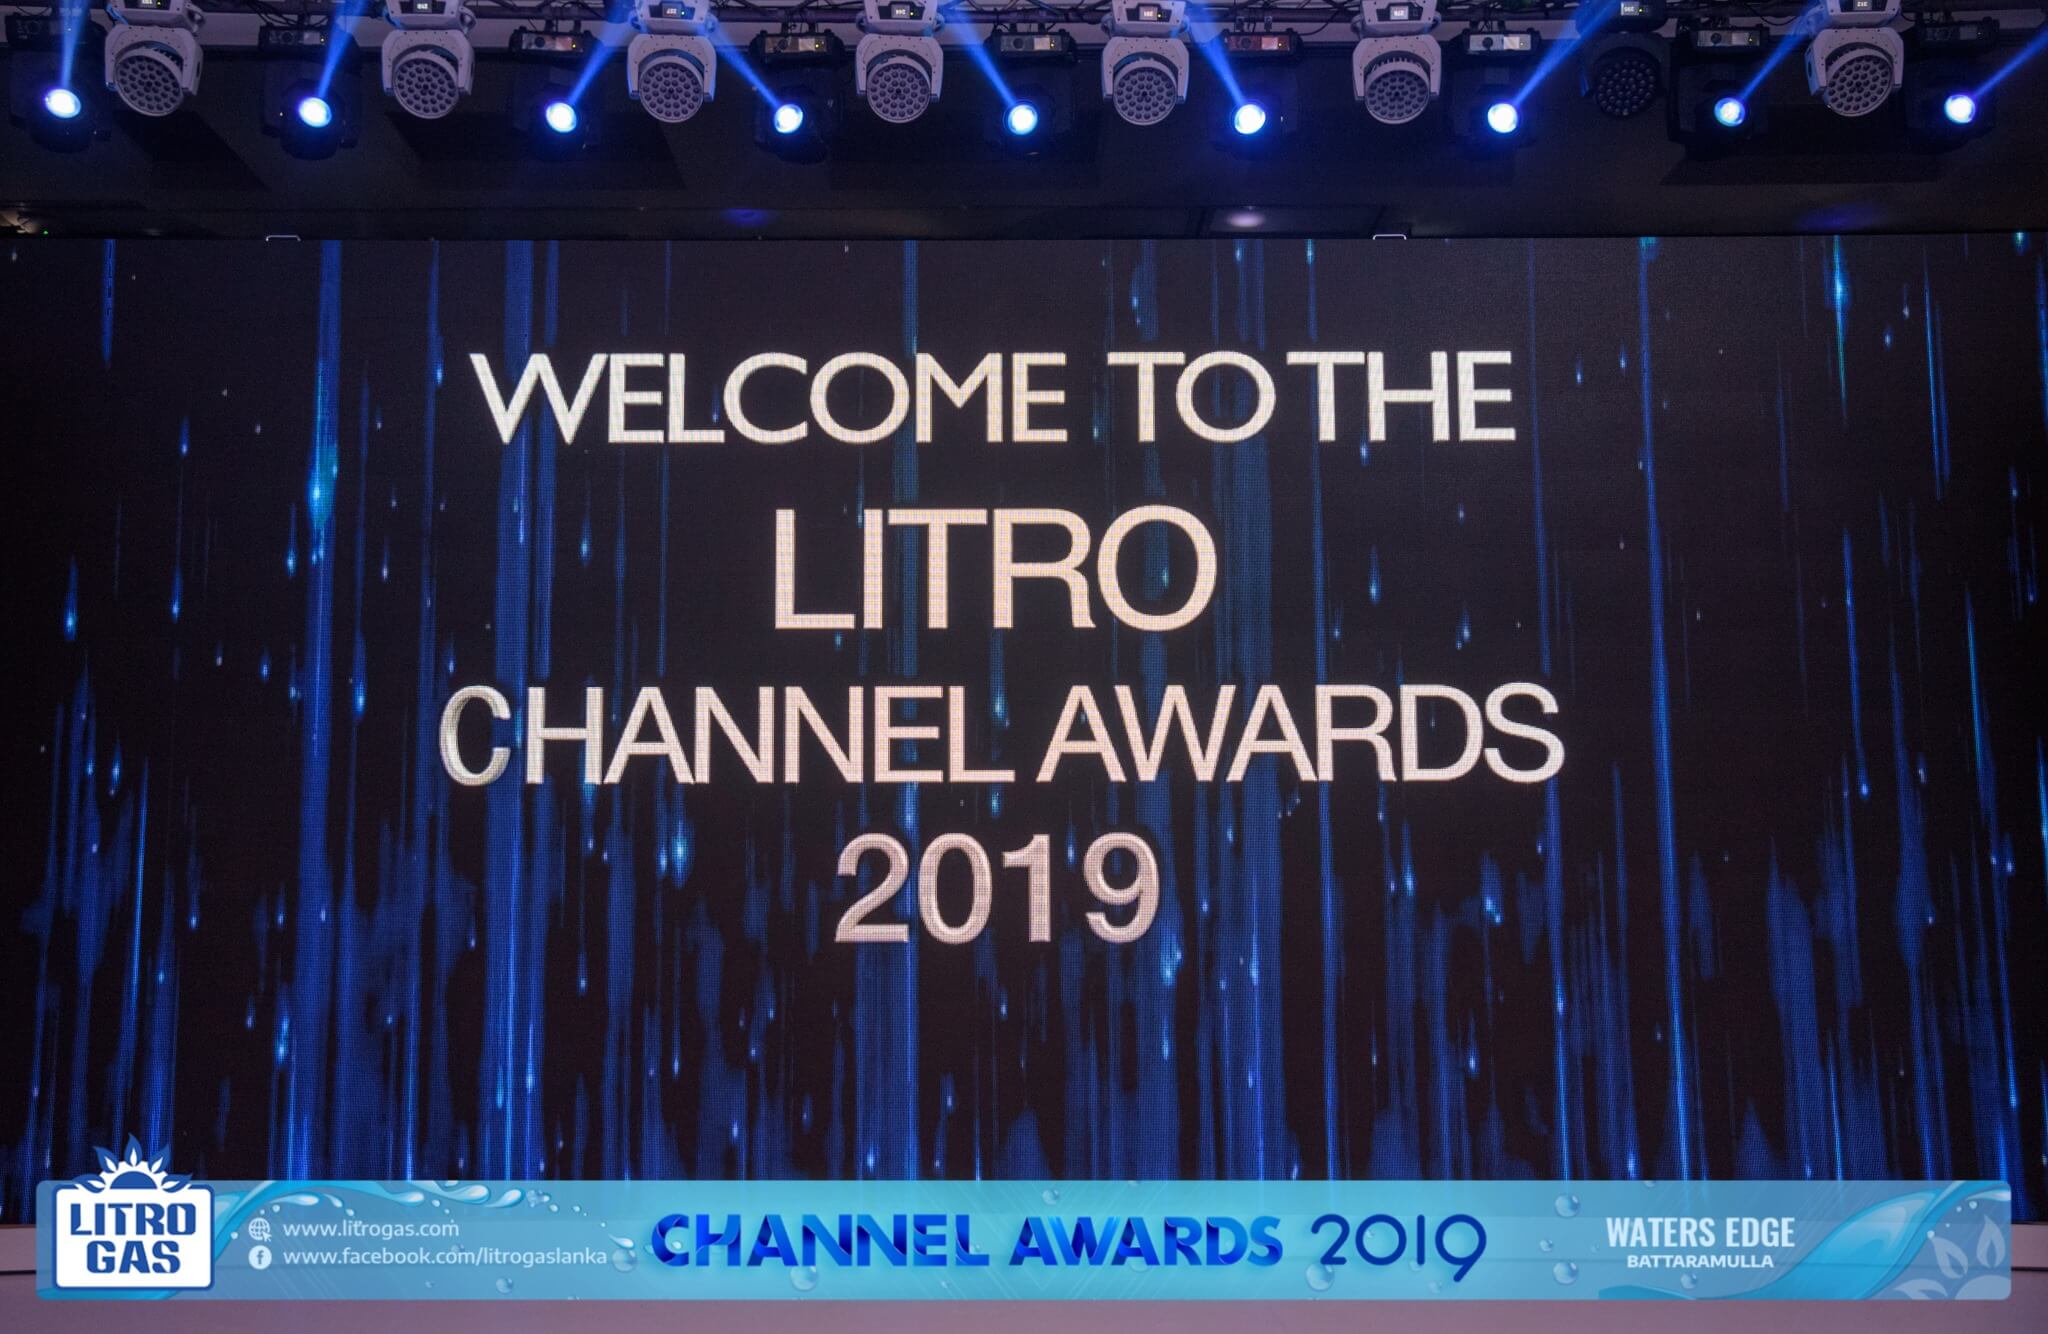 Channel Awards 2019